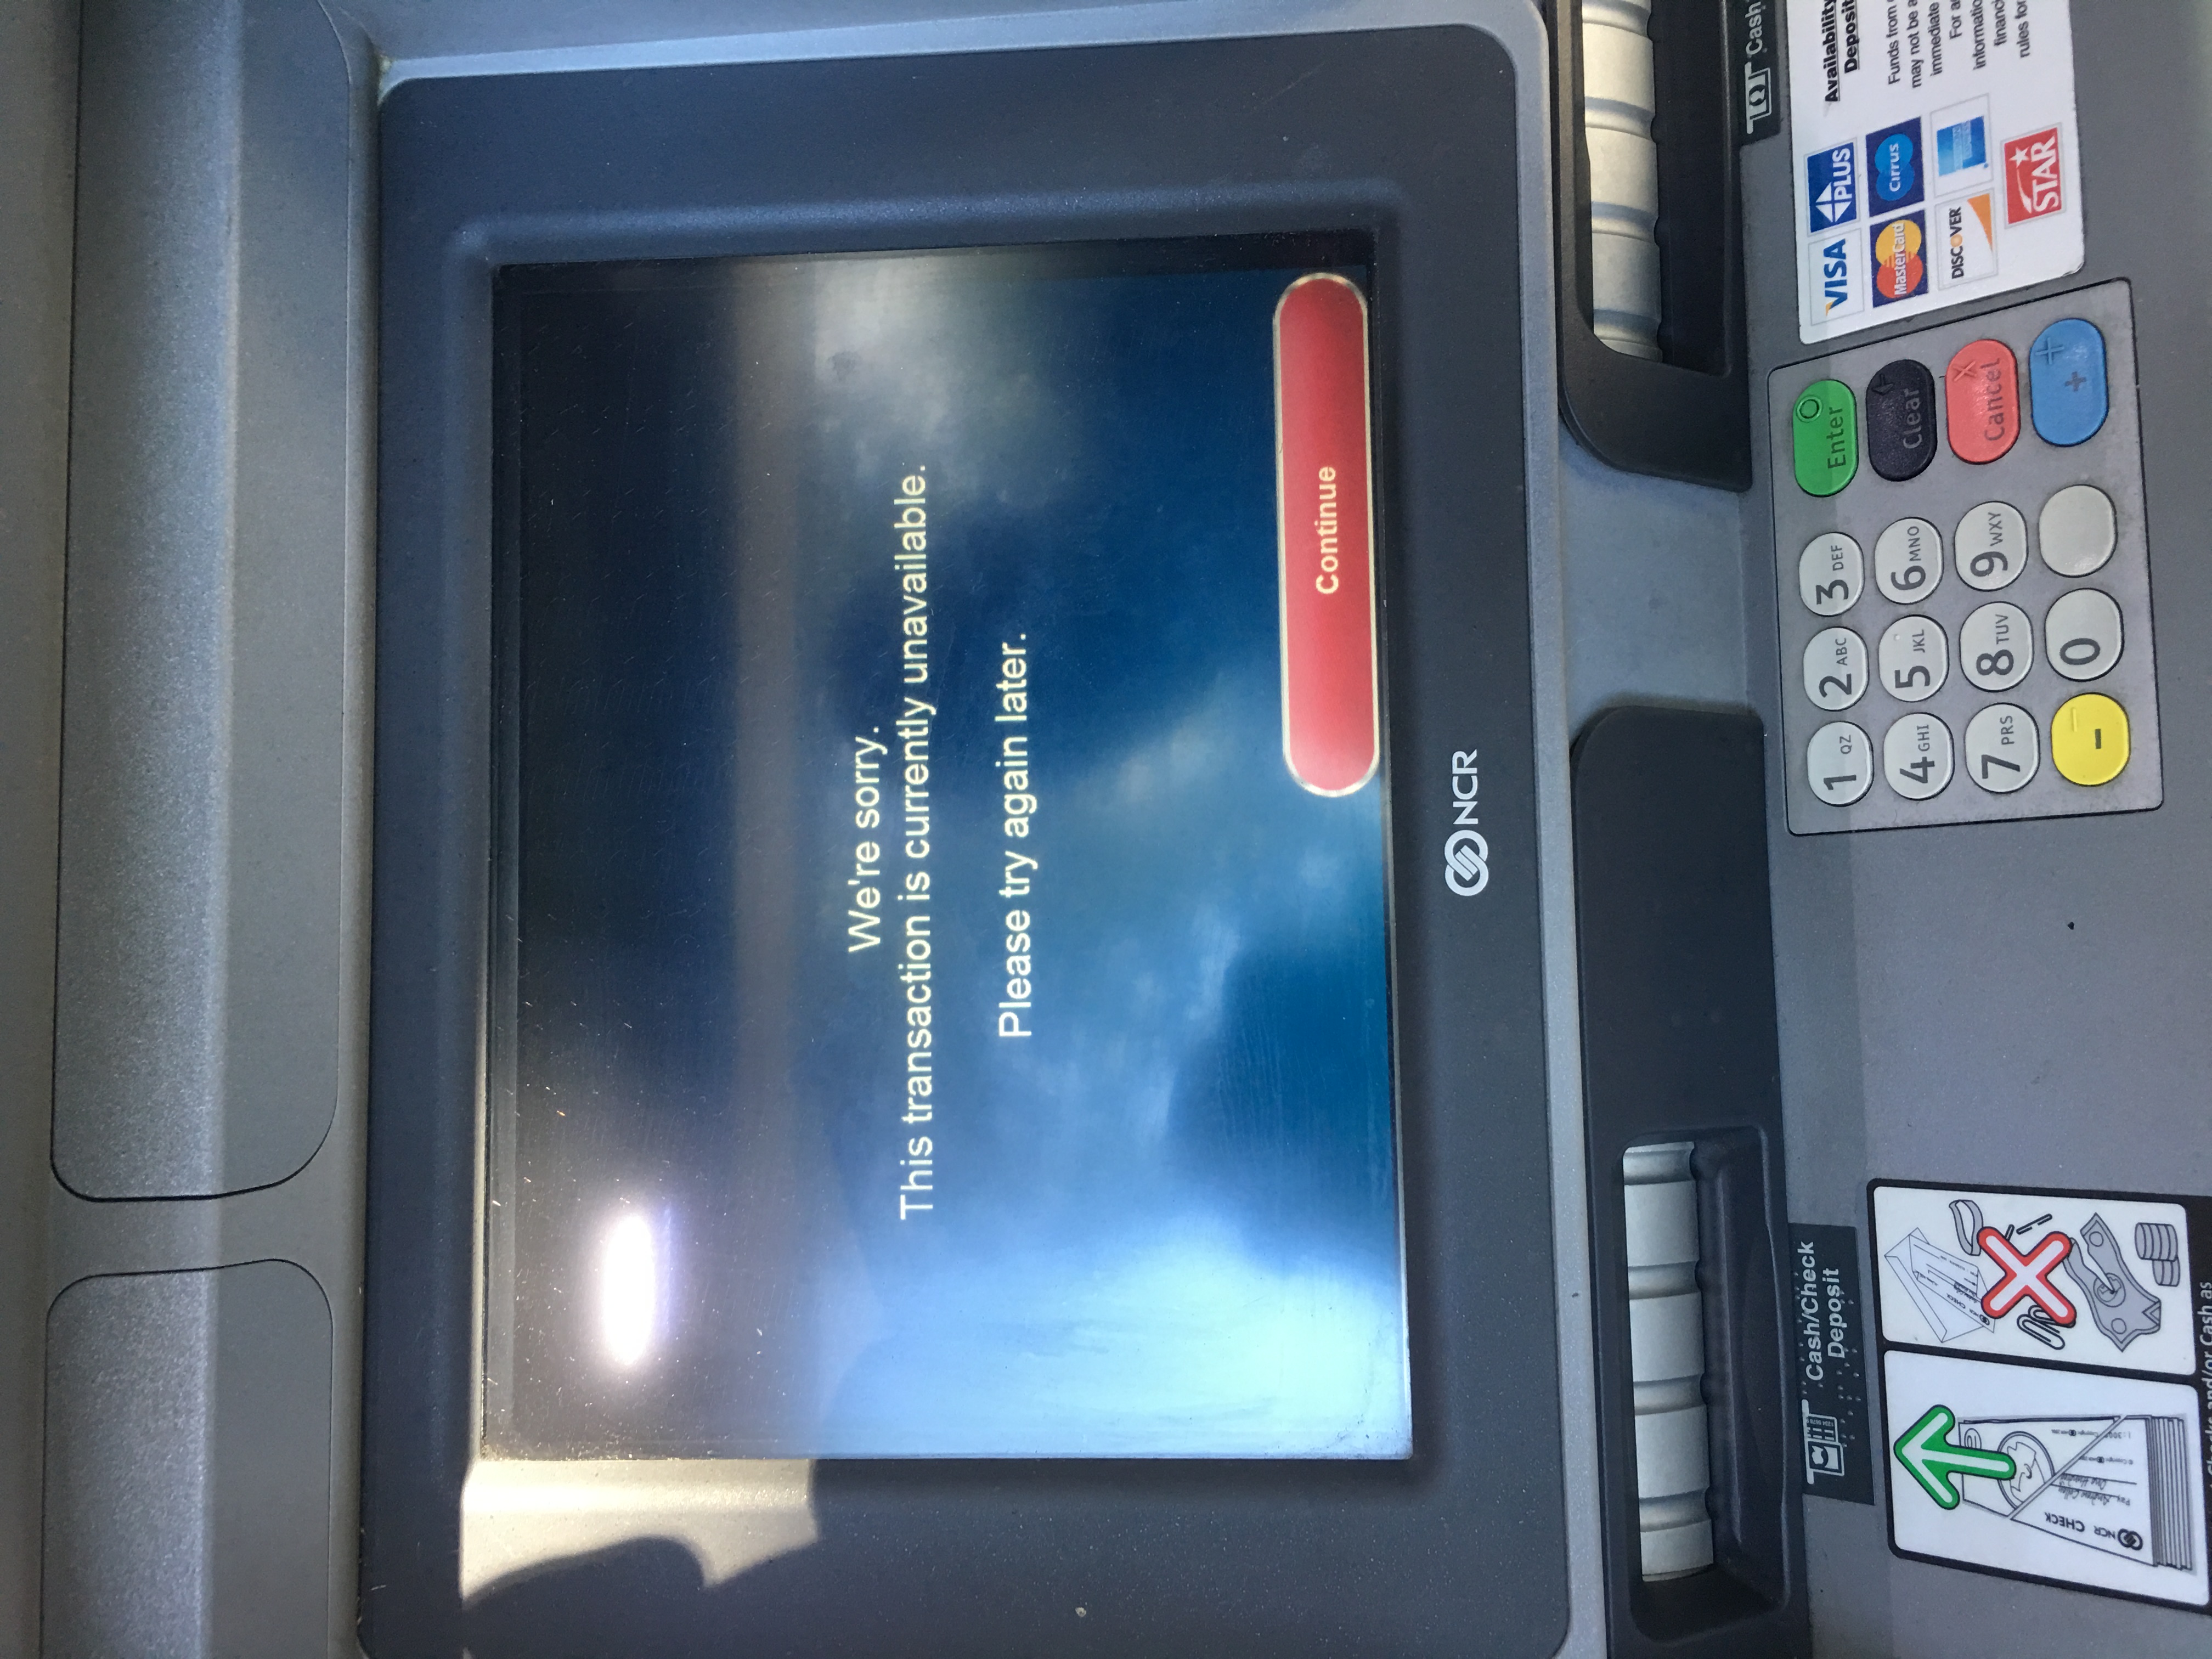 This is what the ATM said after it took my money and failed to give me a receipt.